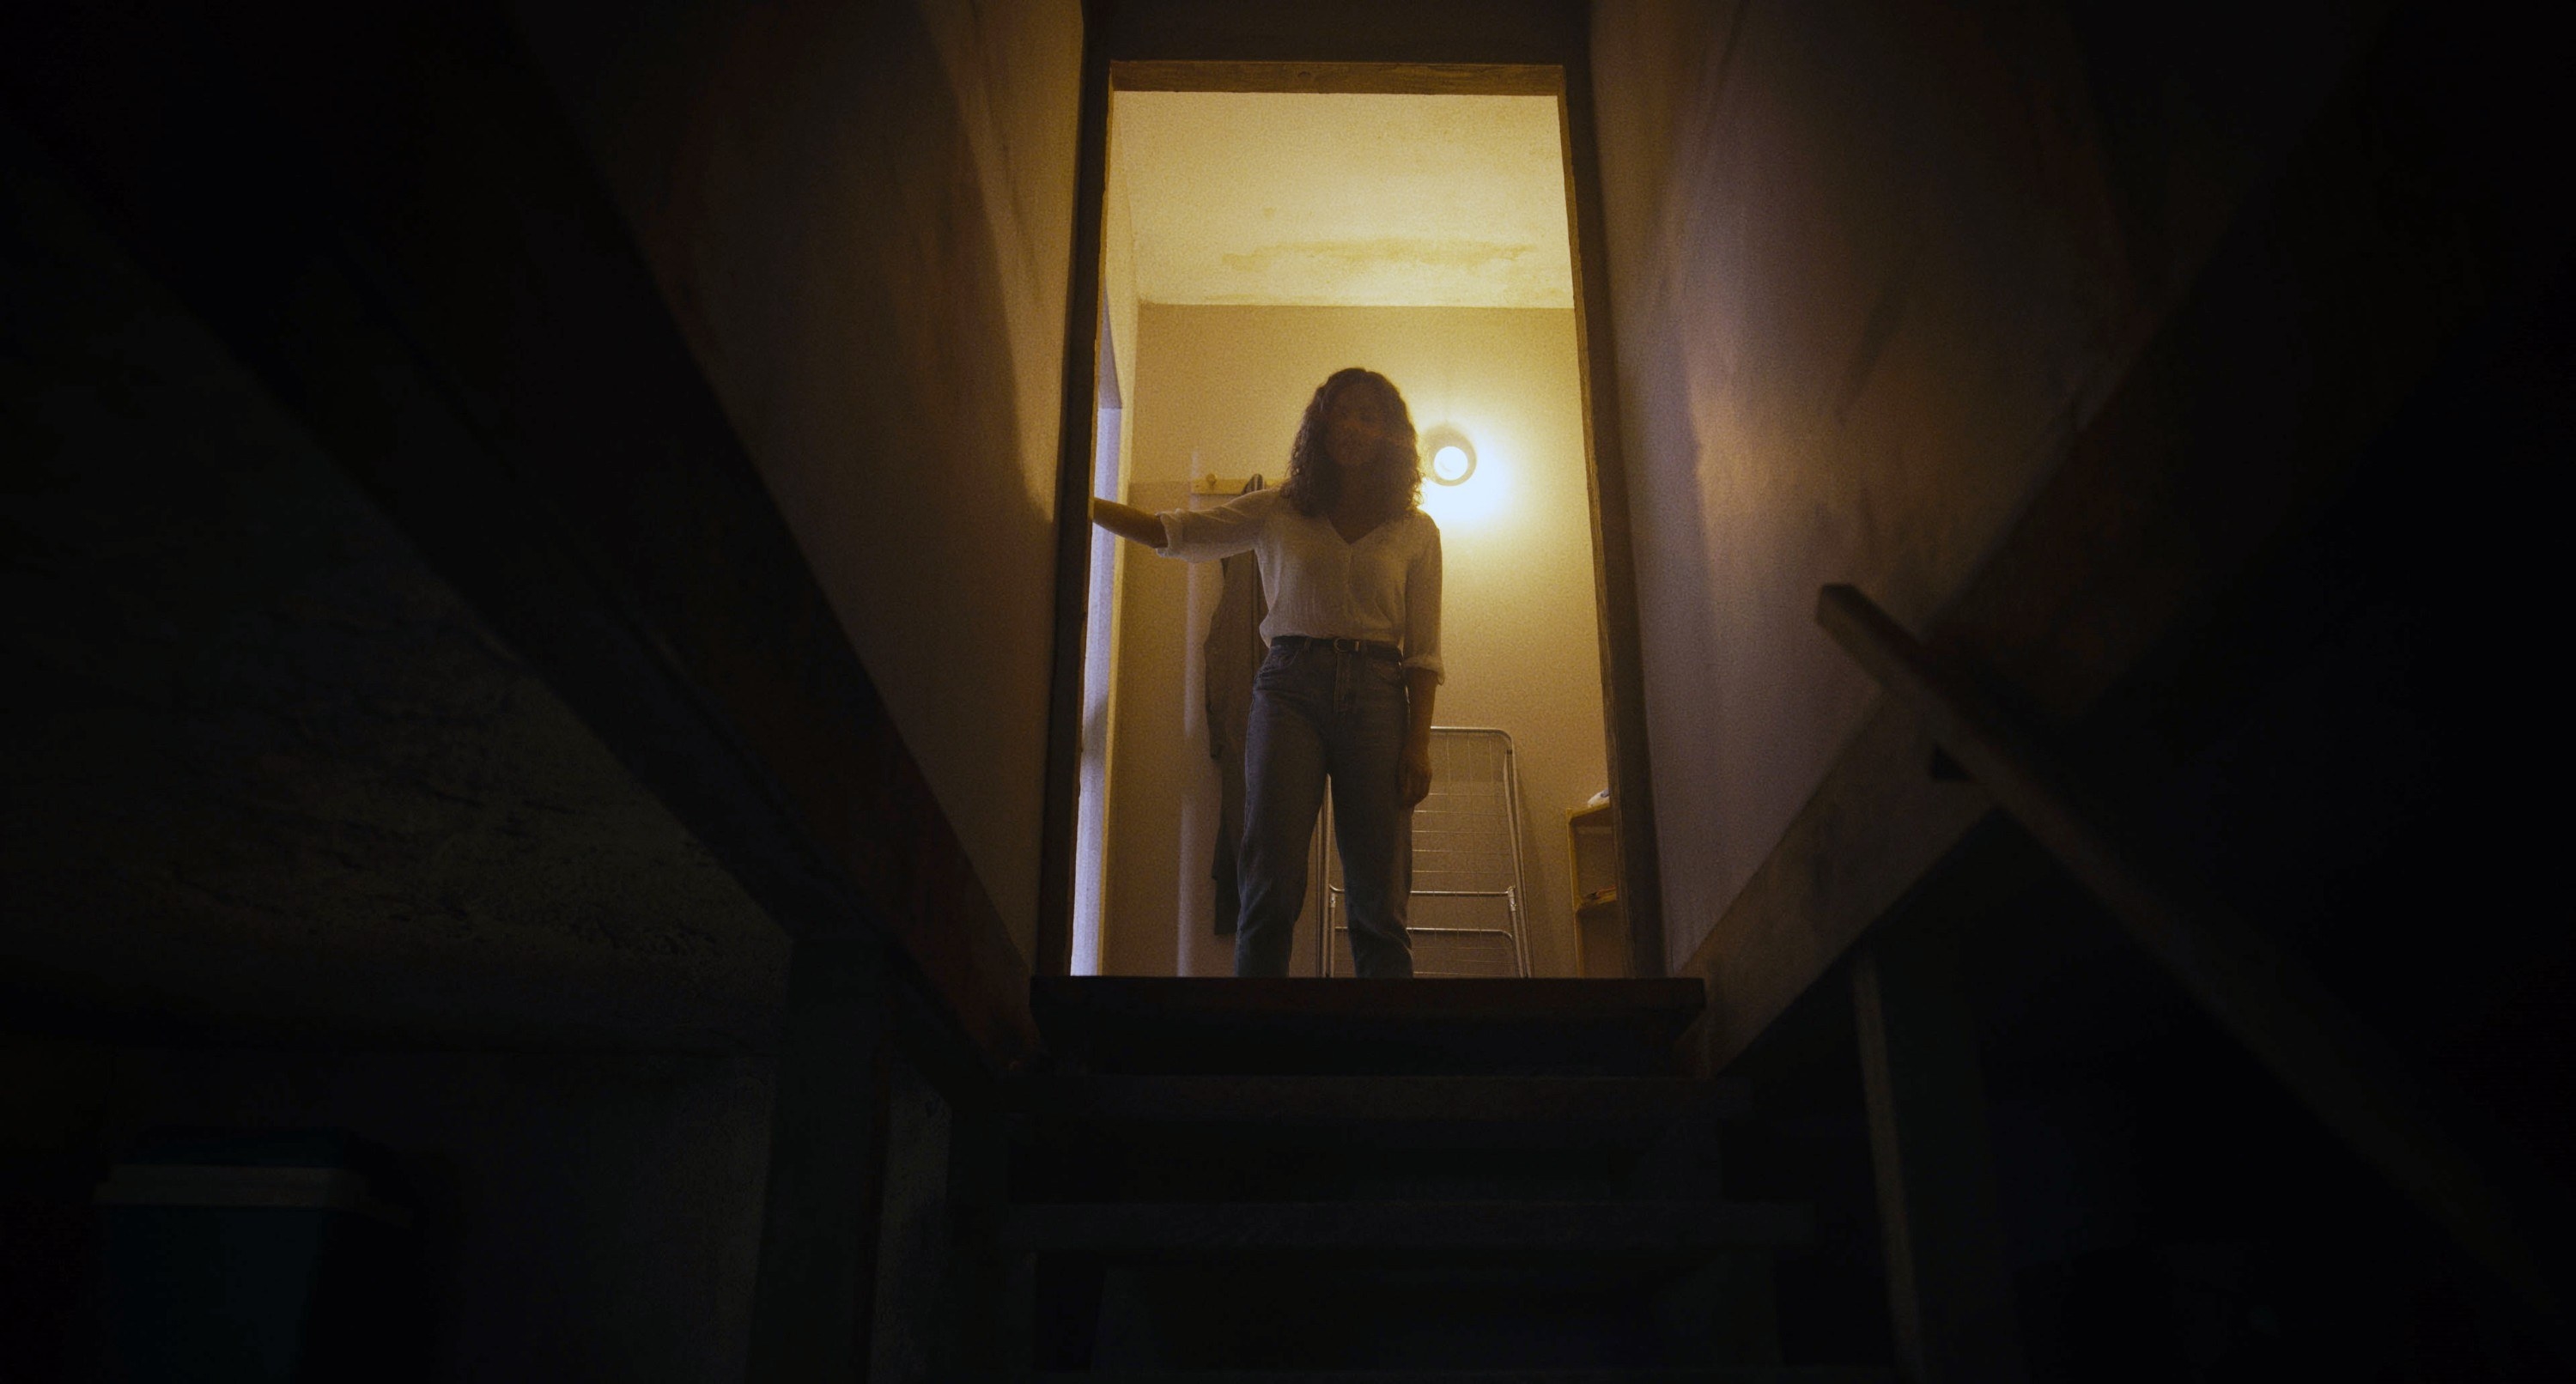 Barbarian Review A Wild Horror Film About An Airbnb picture